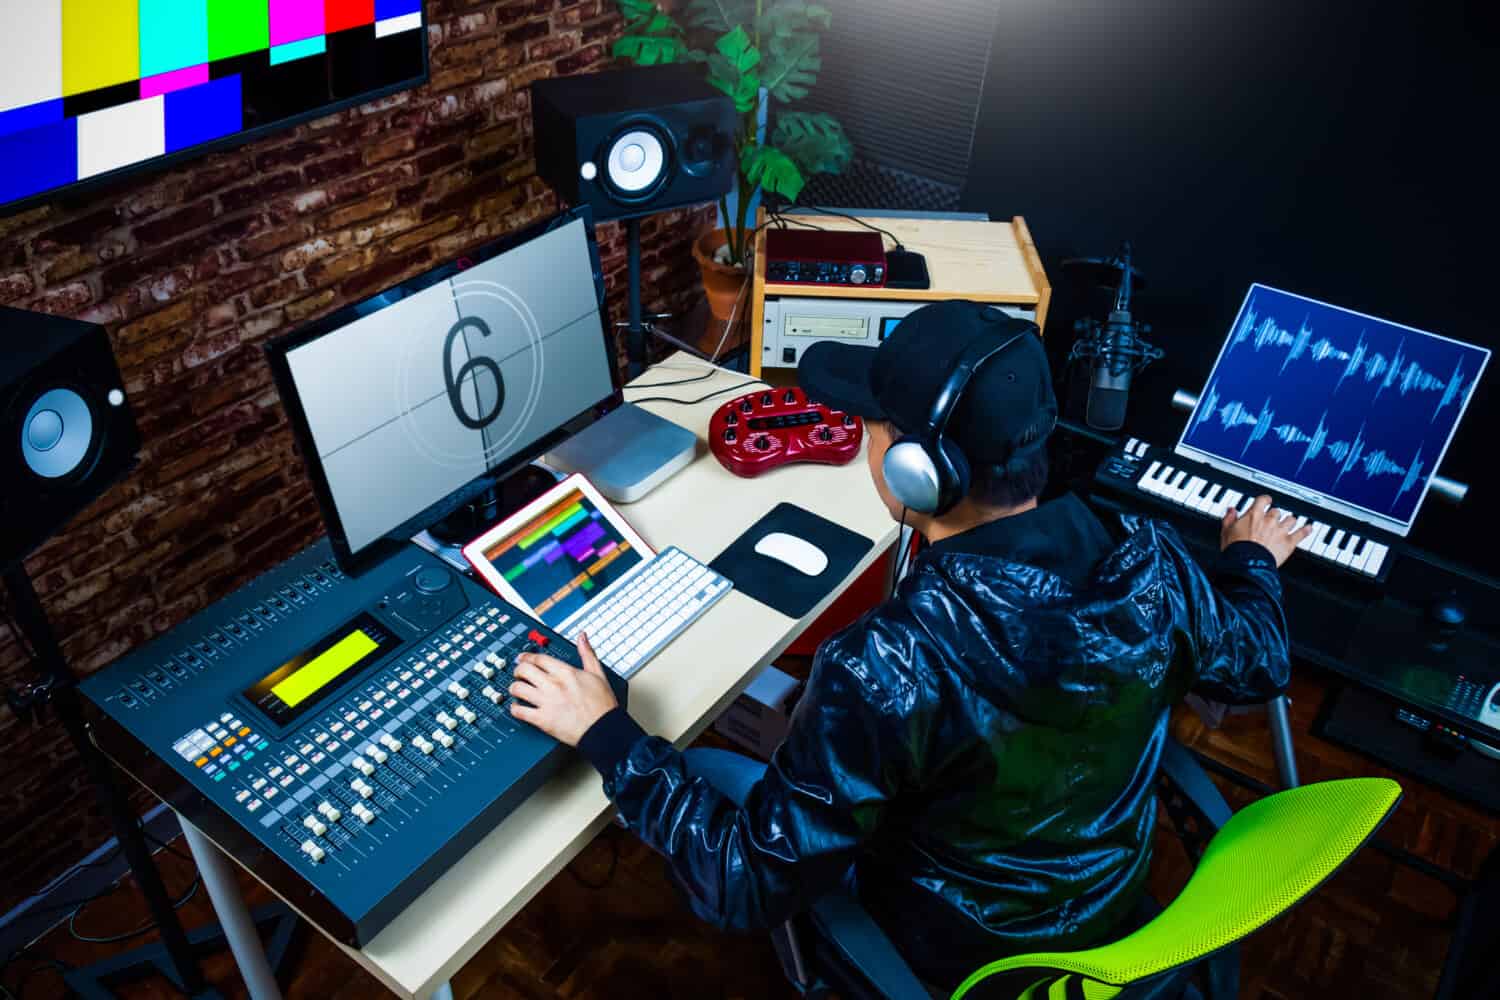 asian male sound engineer working in digital audio & video editing post production studio